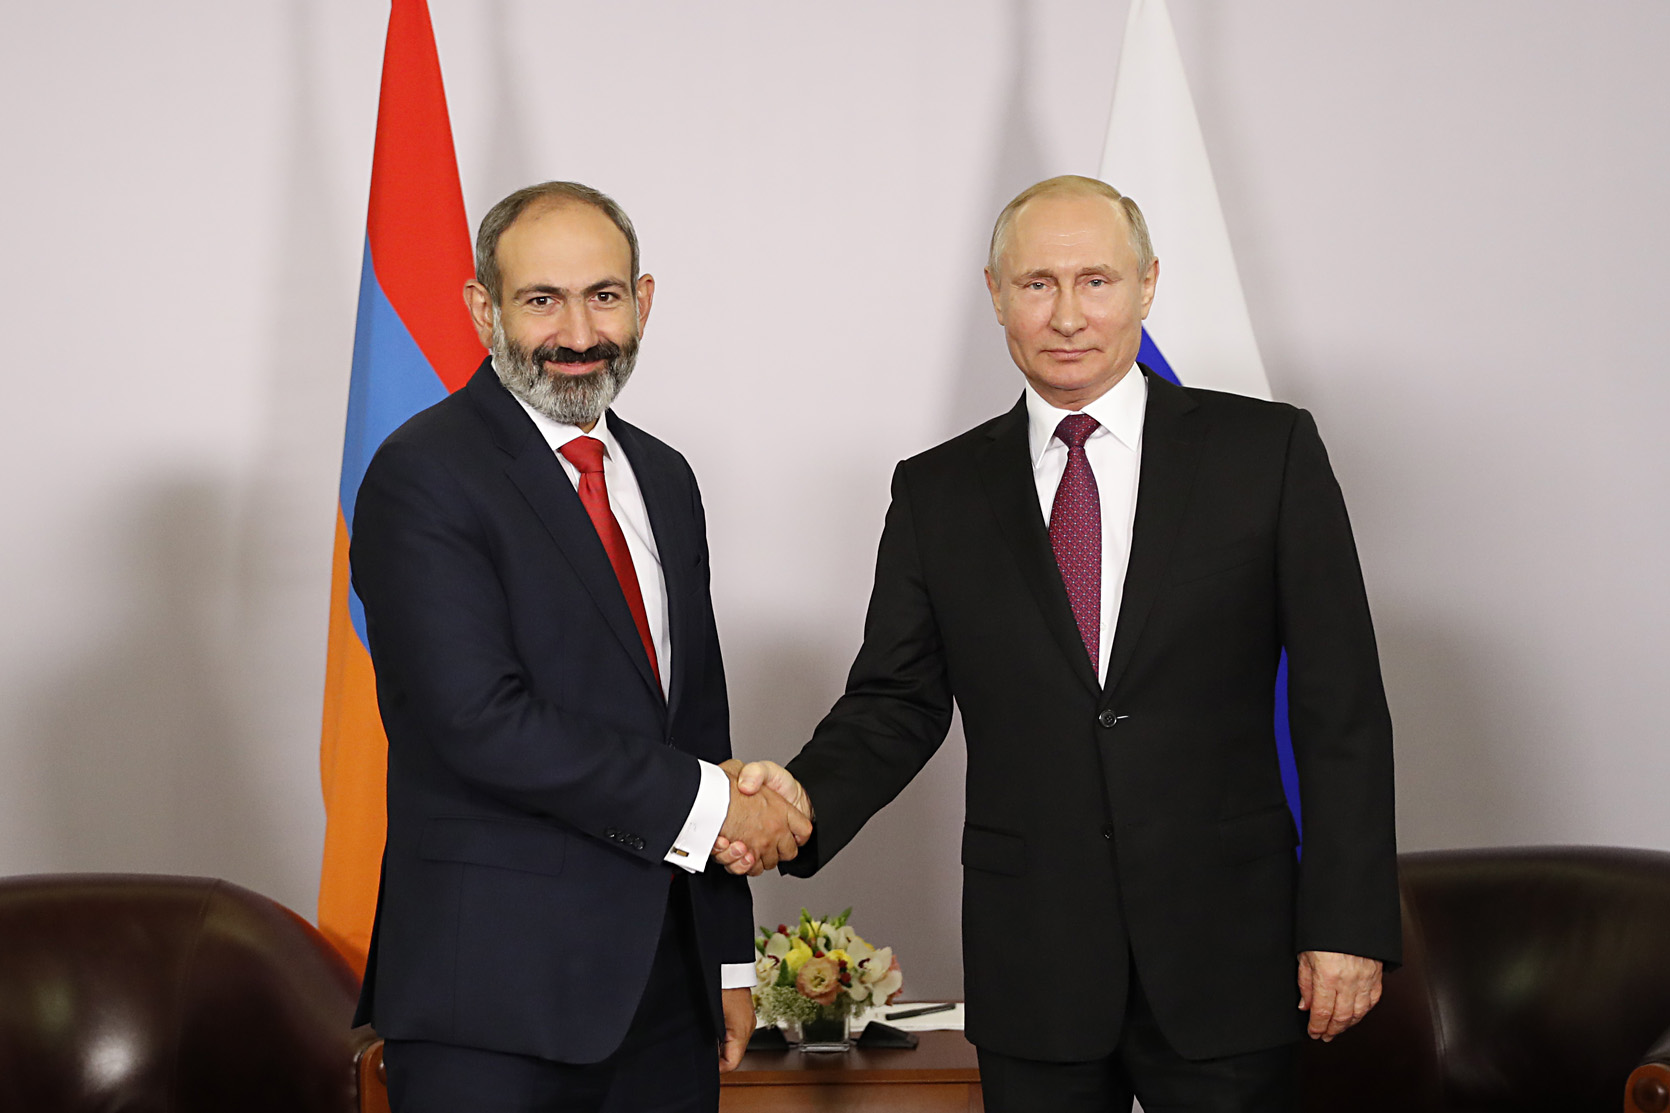 Vladimir Putin congratulated Nikol Pashinyan on his appointment as Prime Minister